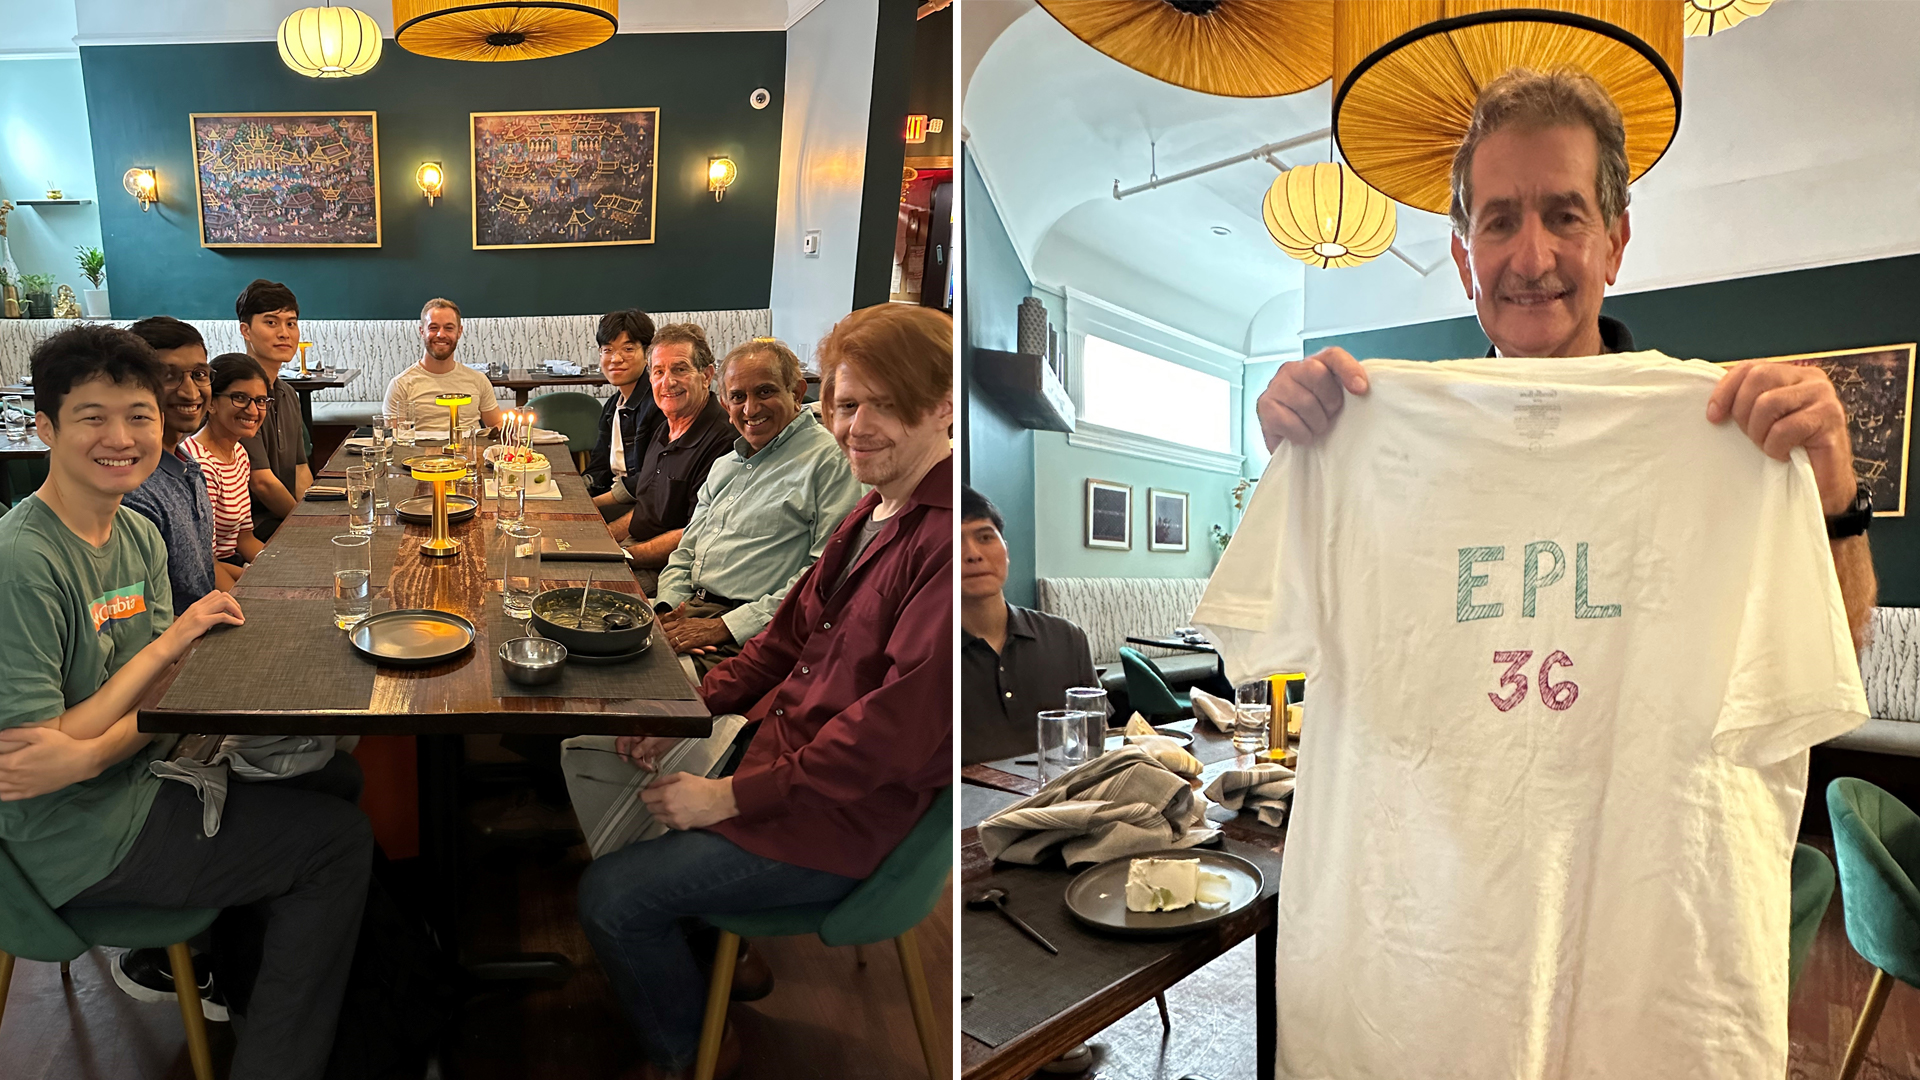 Left photo is of group of men sitting around a large table in a restaurant. Right photo is Alan holding up a t-shirt that says "EPL 36" 